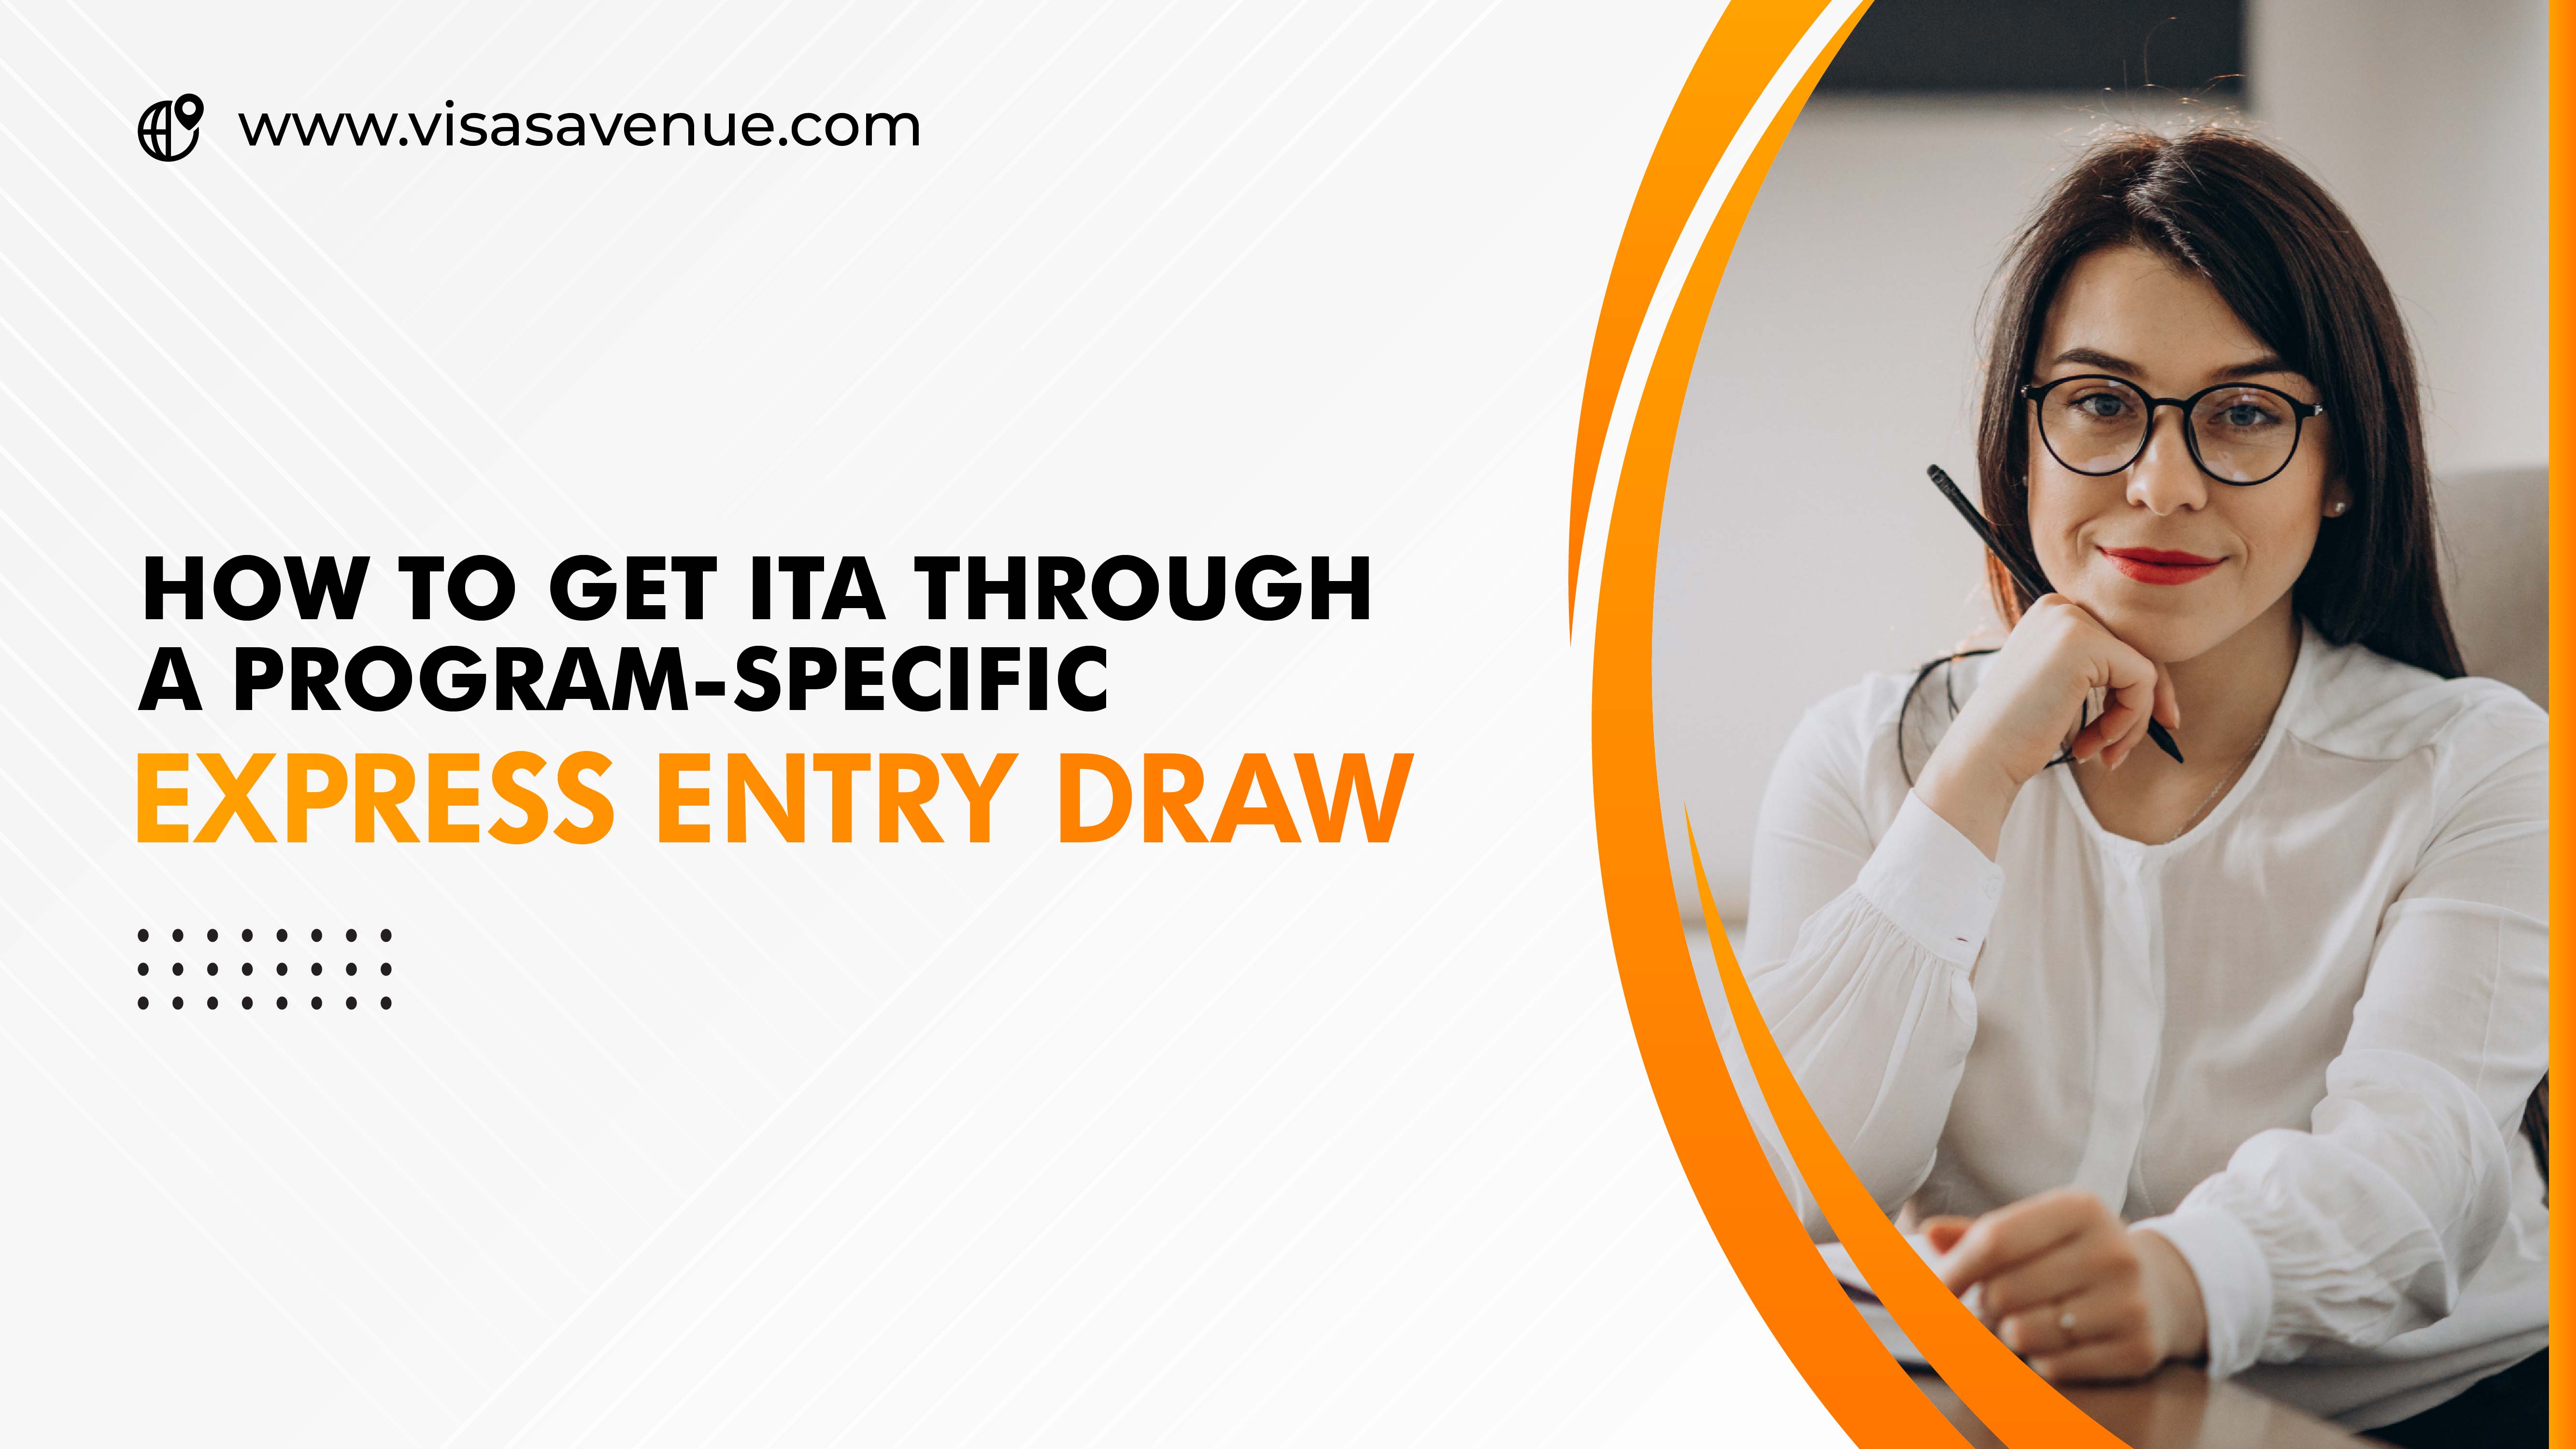 How to get ITA through a Program-Specific Express Entry Draw